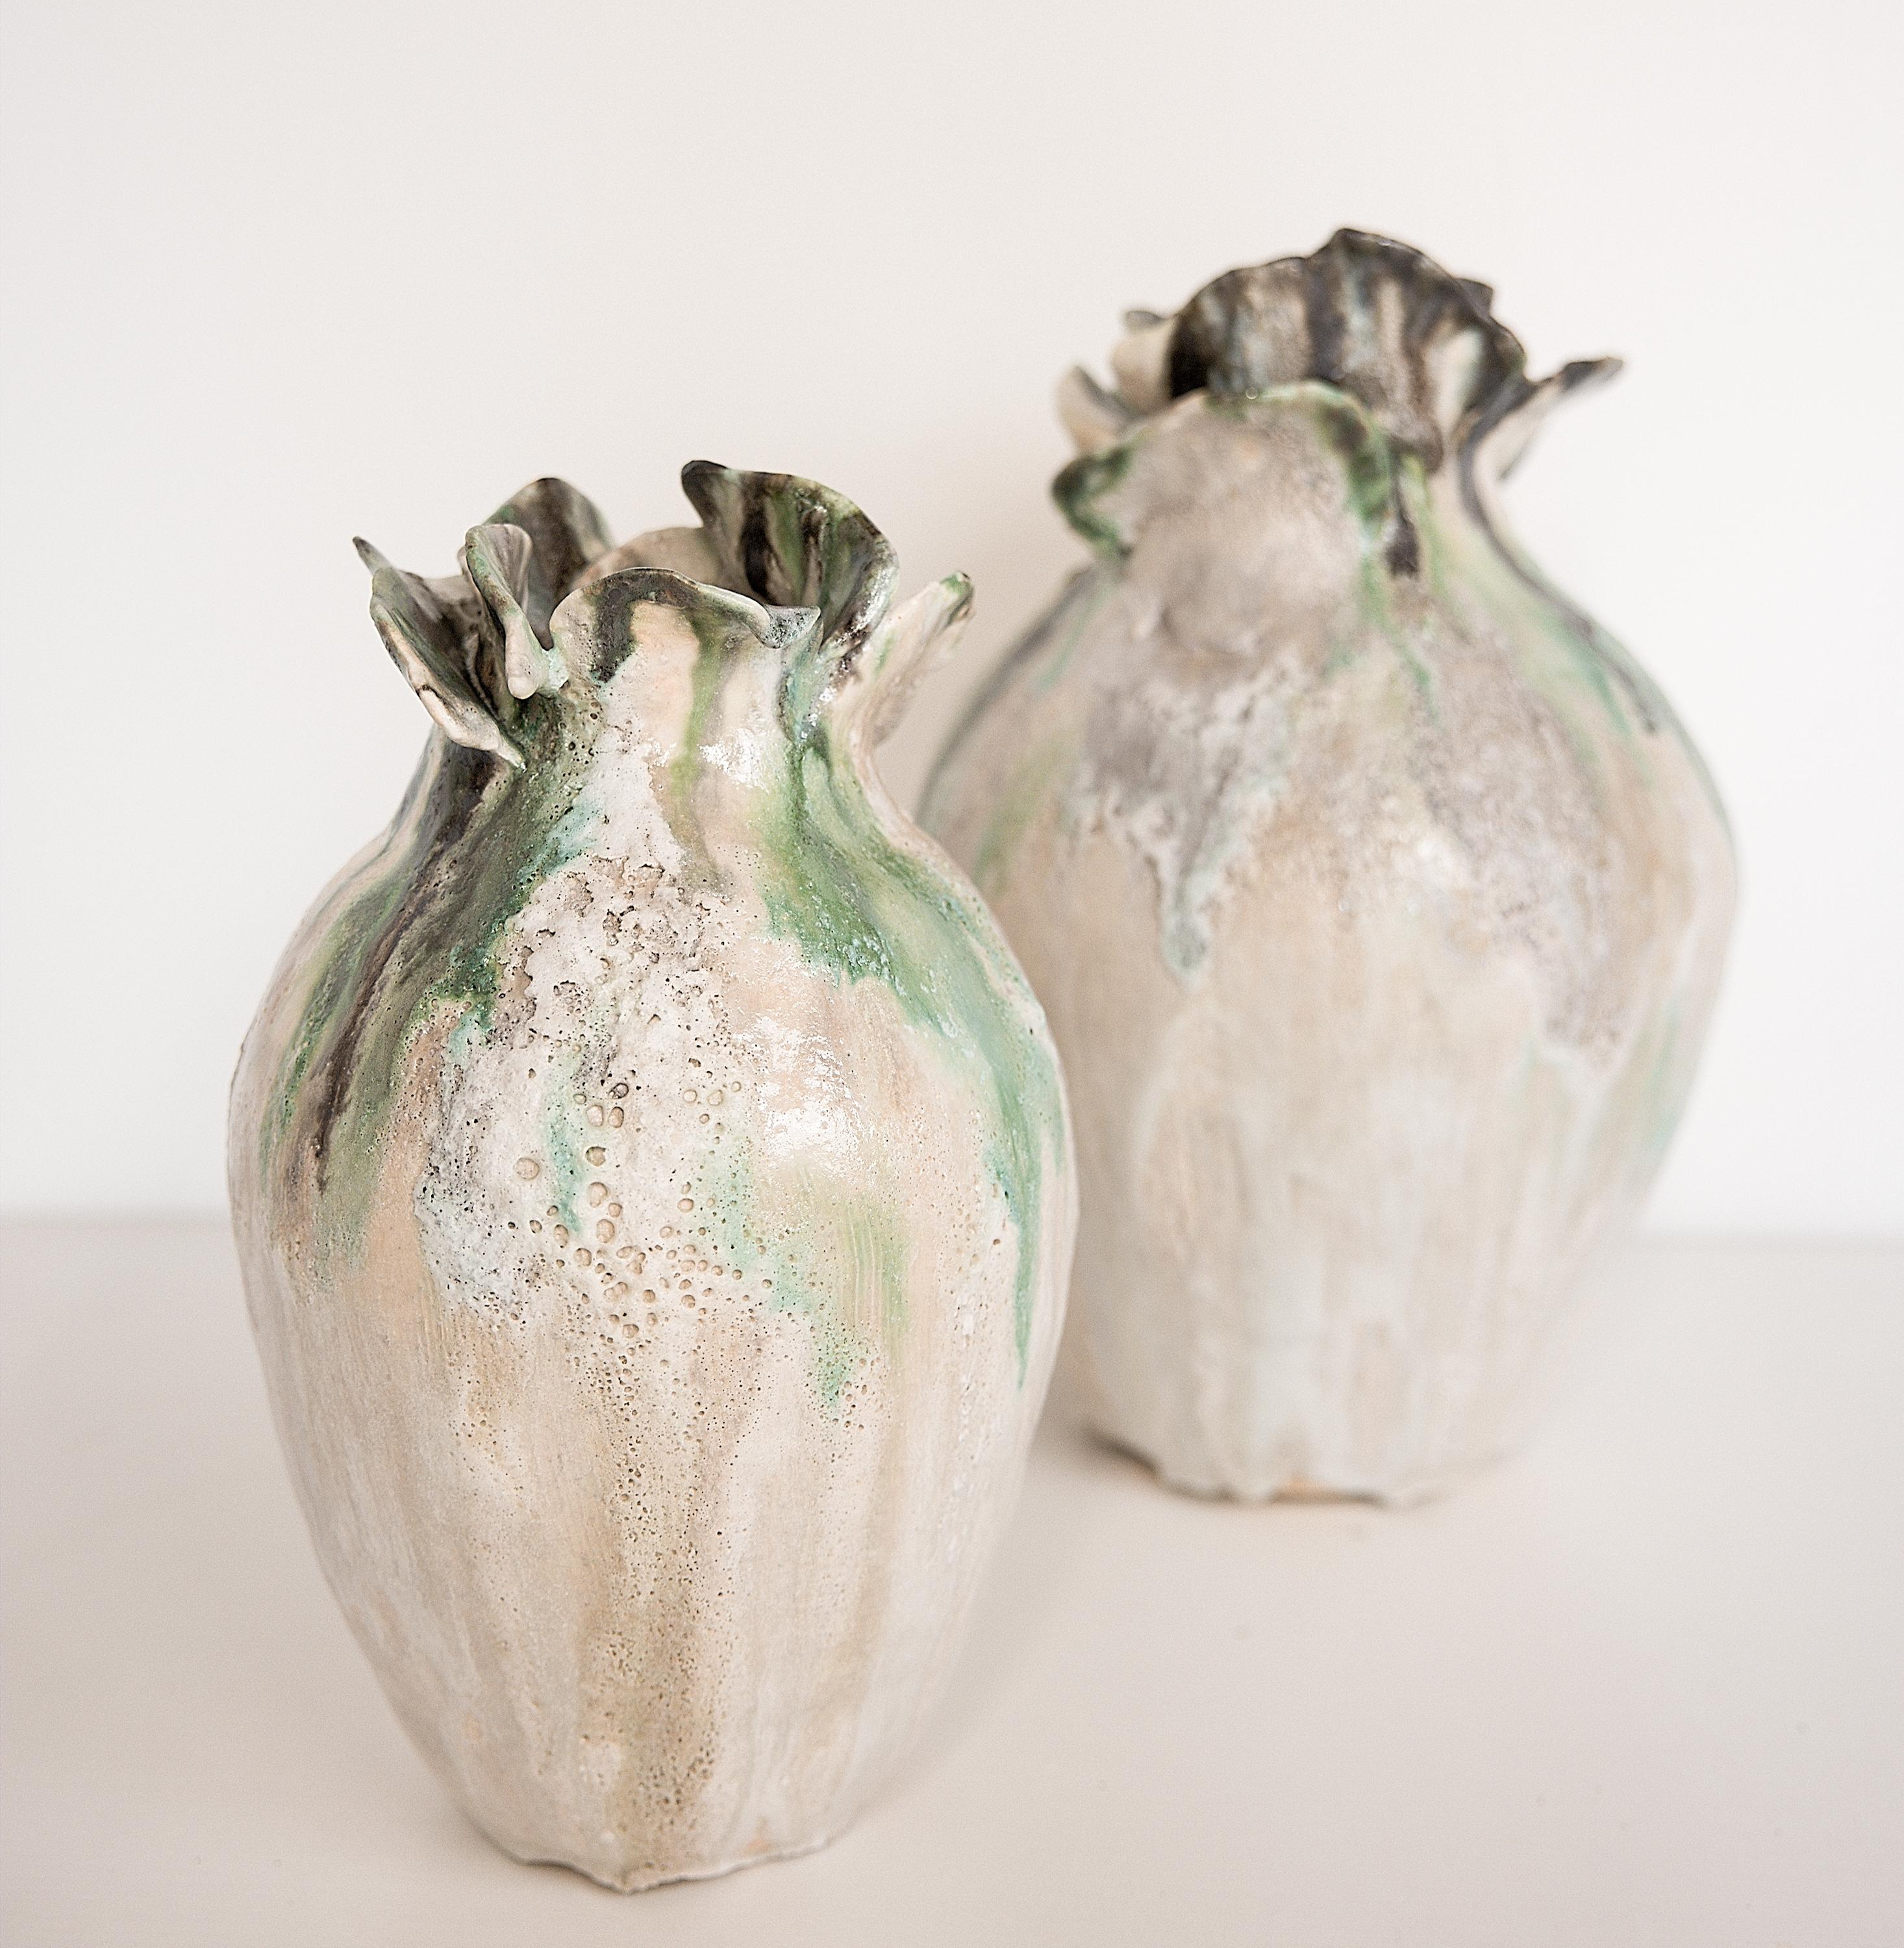 Bring a touch of modern style to your home with our Yeonhwa Jars. ( Lotus Flower Jars)
. Part of our permanent collection, each striking vase features a unique, moon-like design in an eye-catching light lava glaze.
Please select your size, Each one